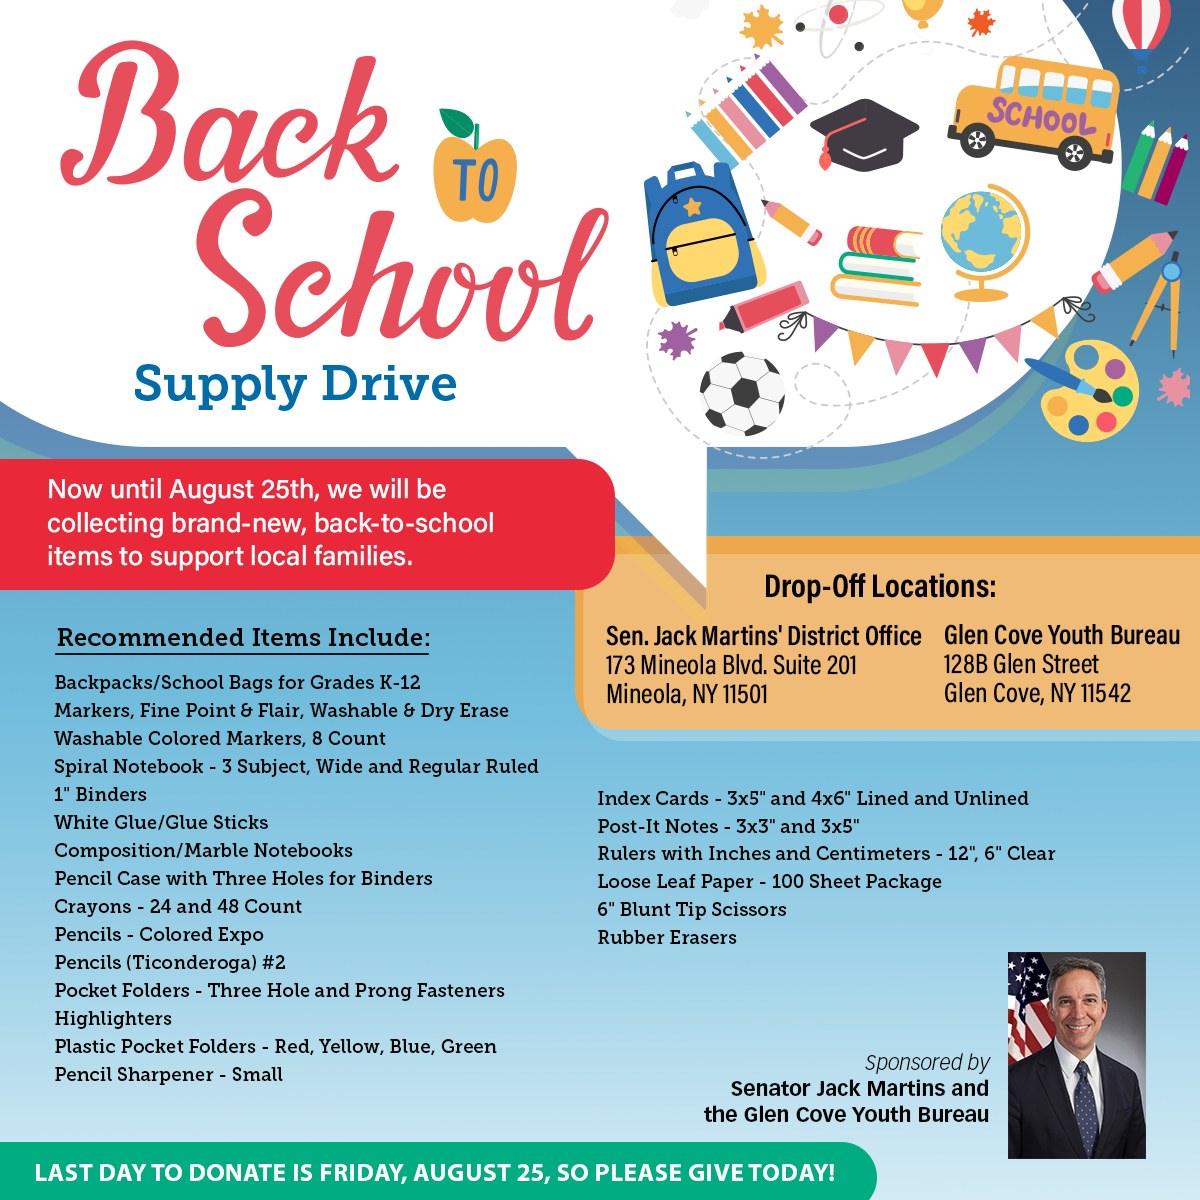 Our Back to School Supply Drive is still going with only 2 weeks to go! Save our Students! Join my effort to support our local students and help prepare them for the new school year!

#backtoschool #schoolsupplydrive #StudentSuccess